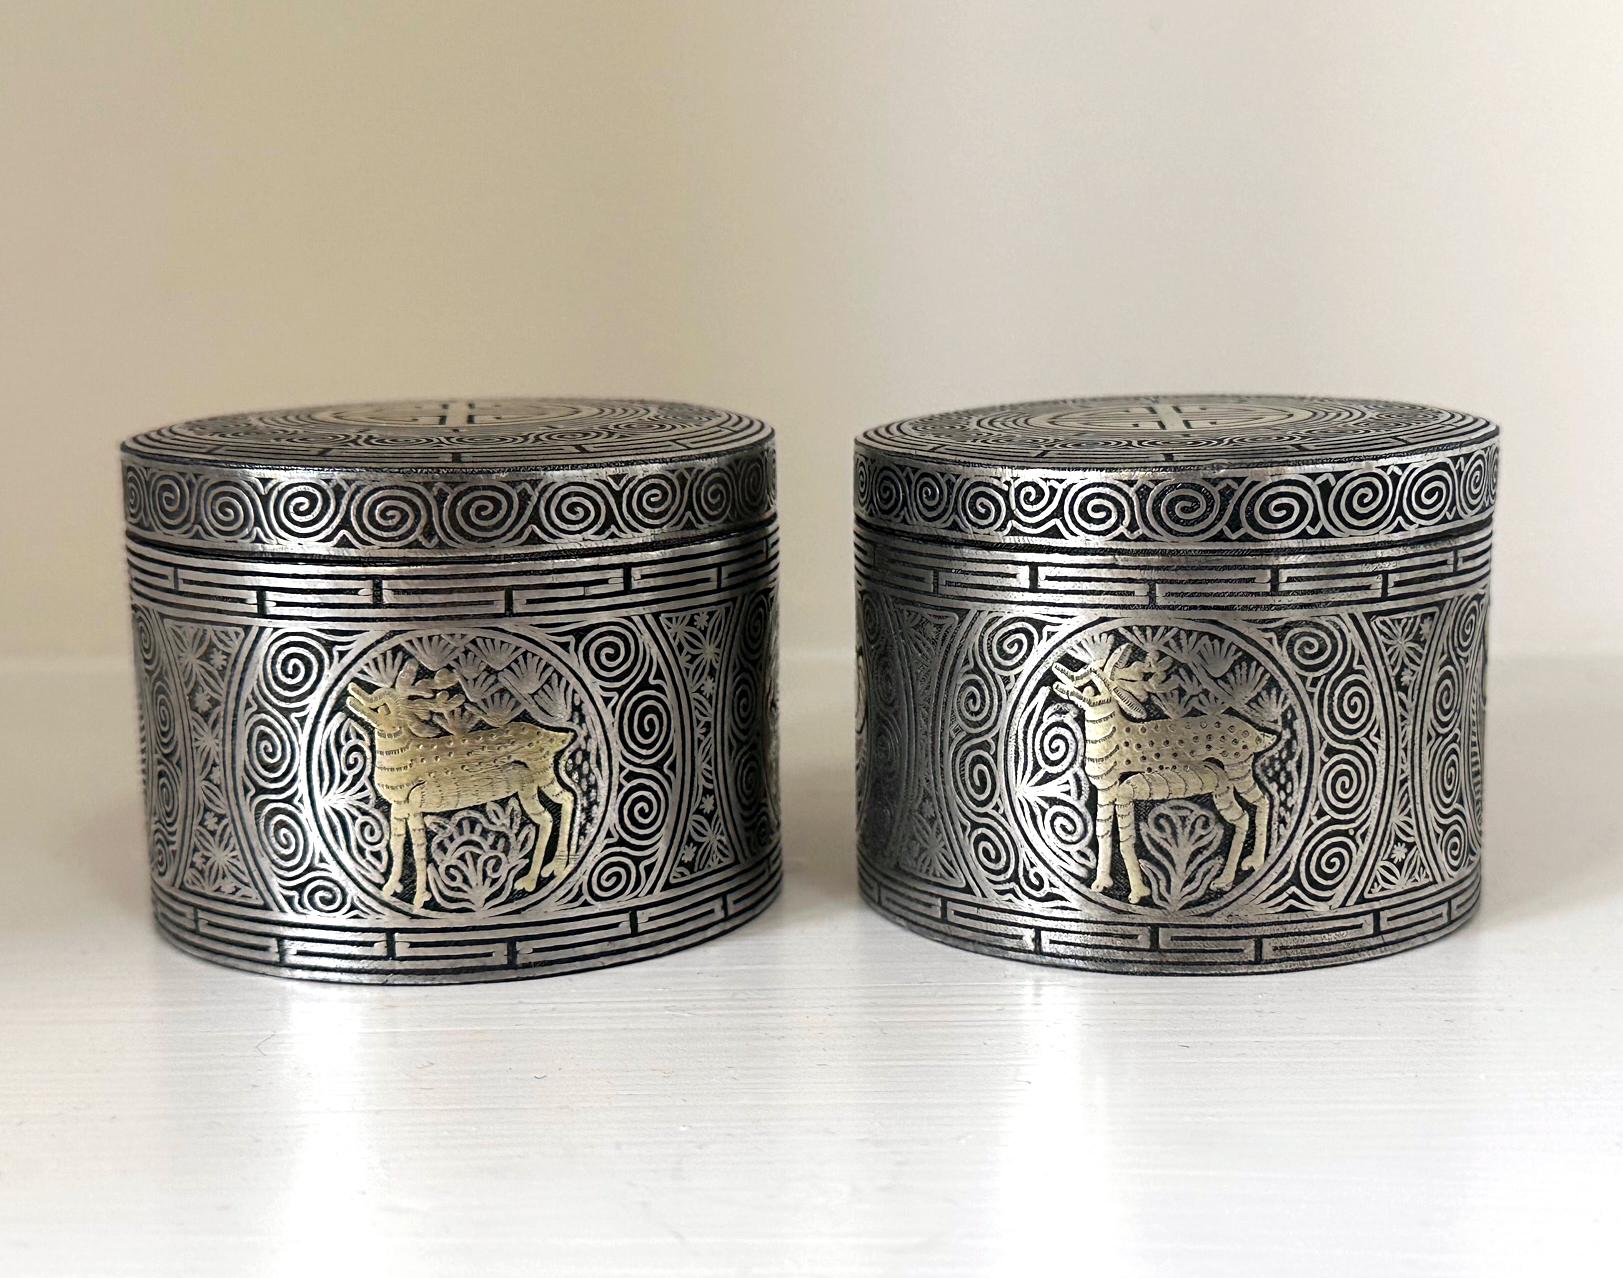 A fine pair of Korean iron box with intricate silver inlays dated to the late Joseon Dynasty circa 19th century. The matching circular boxes was most likely used to store tobacco leaves. Their surface was beautifully decorated with elaborate silver